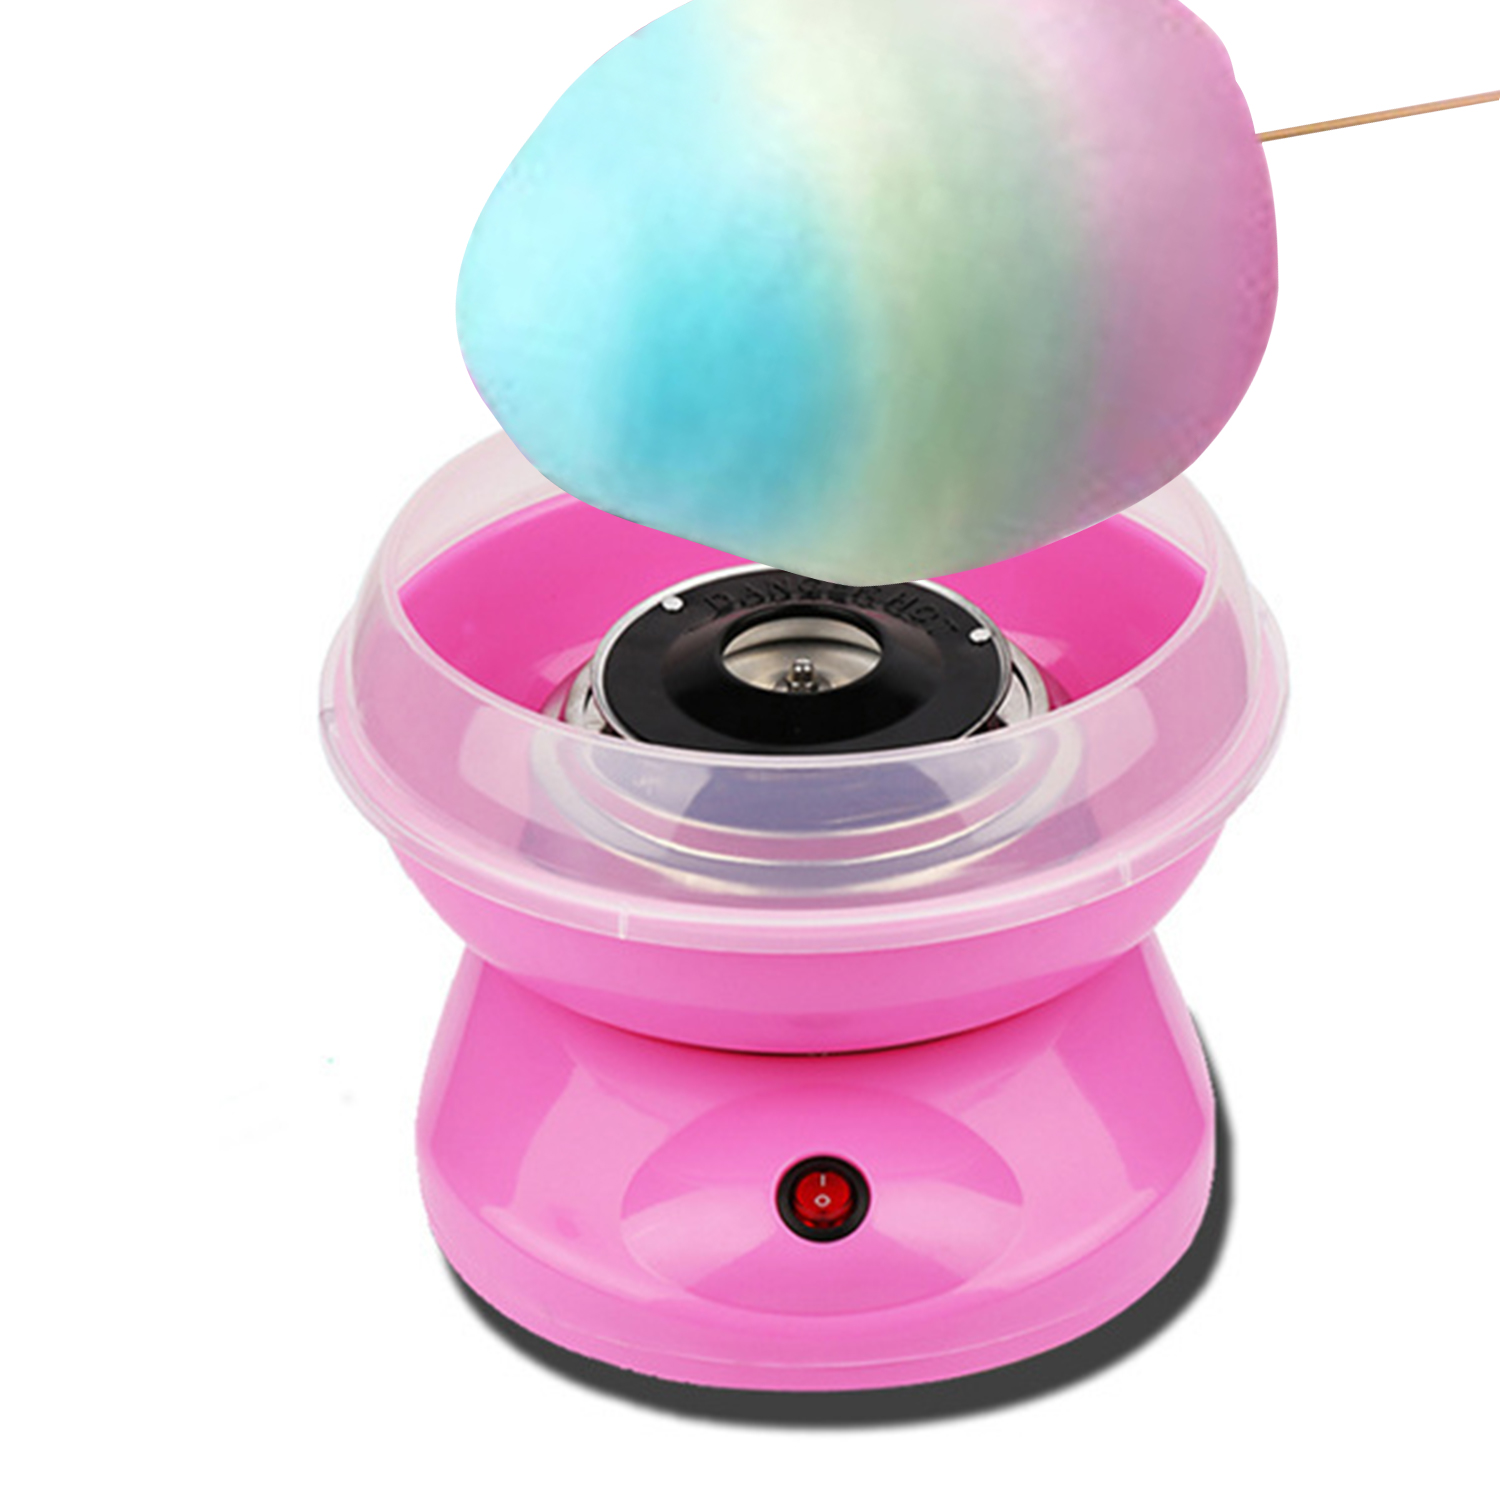 Cotton Candy Machine Cotton Candy Maker Fashion Mini Cotton Candy Machine,Sugar Floss Maker,DIY Marshmallow Machine,Great for Home Party Movie Theater and Birthday Gift